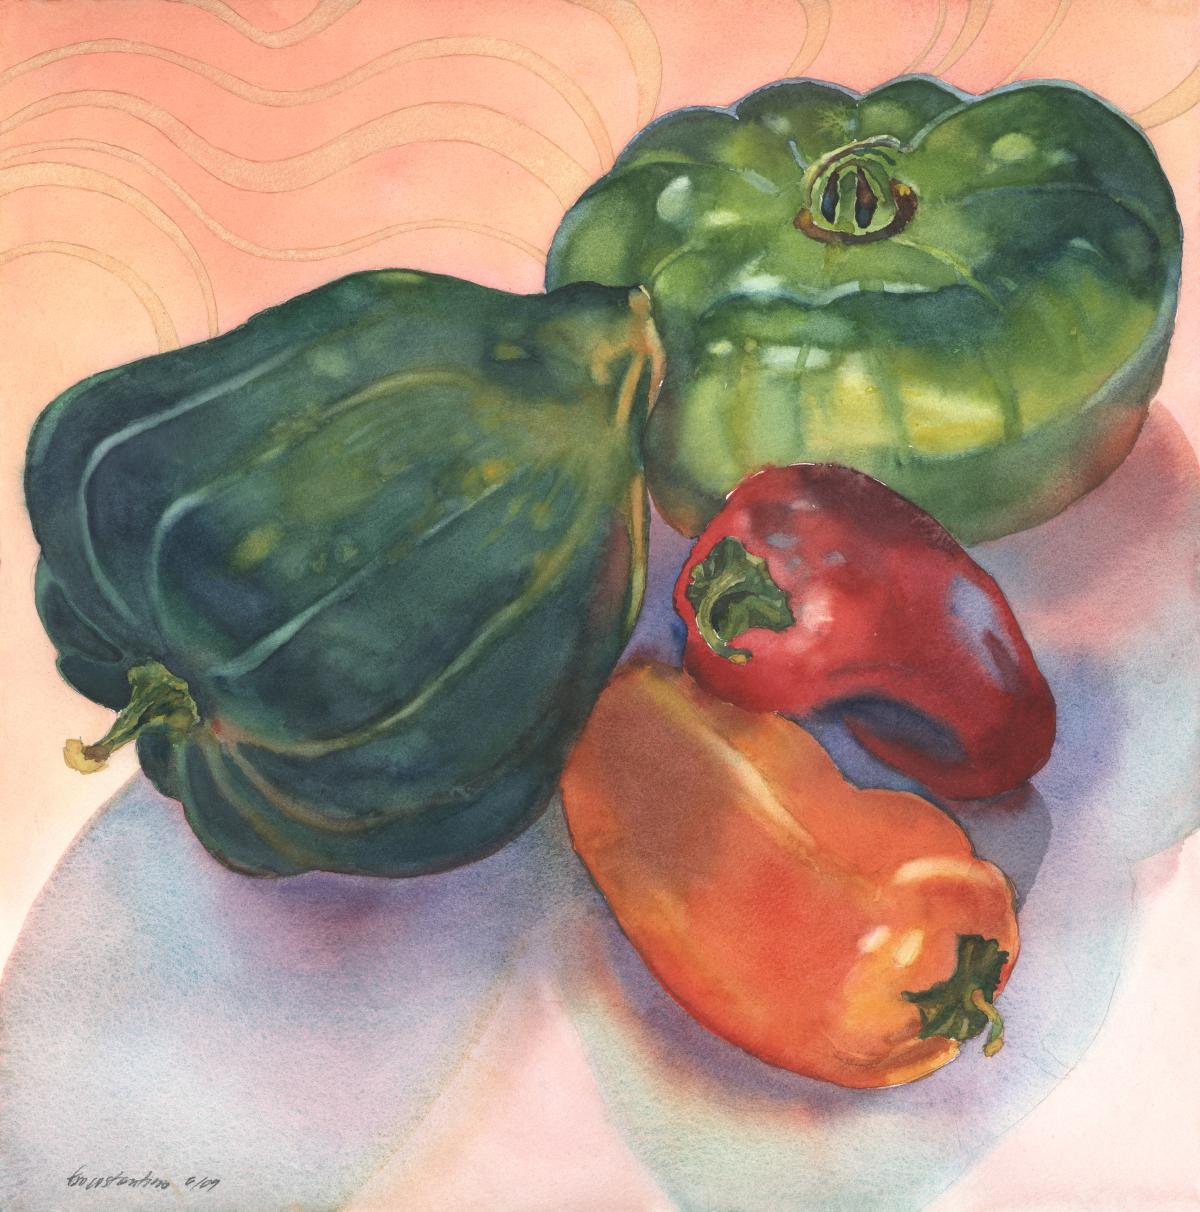 Ratatouille Quartet - watercolor still life painting by Frank Costantino